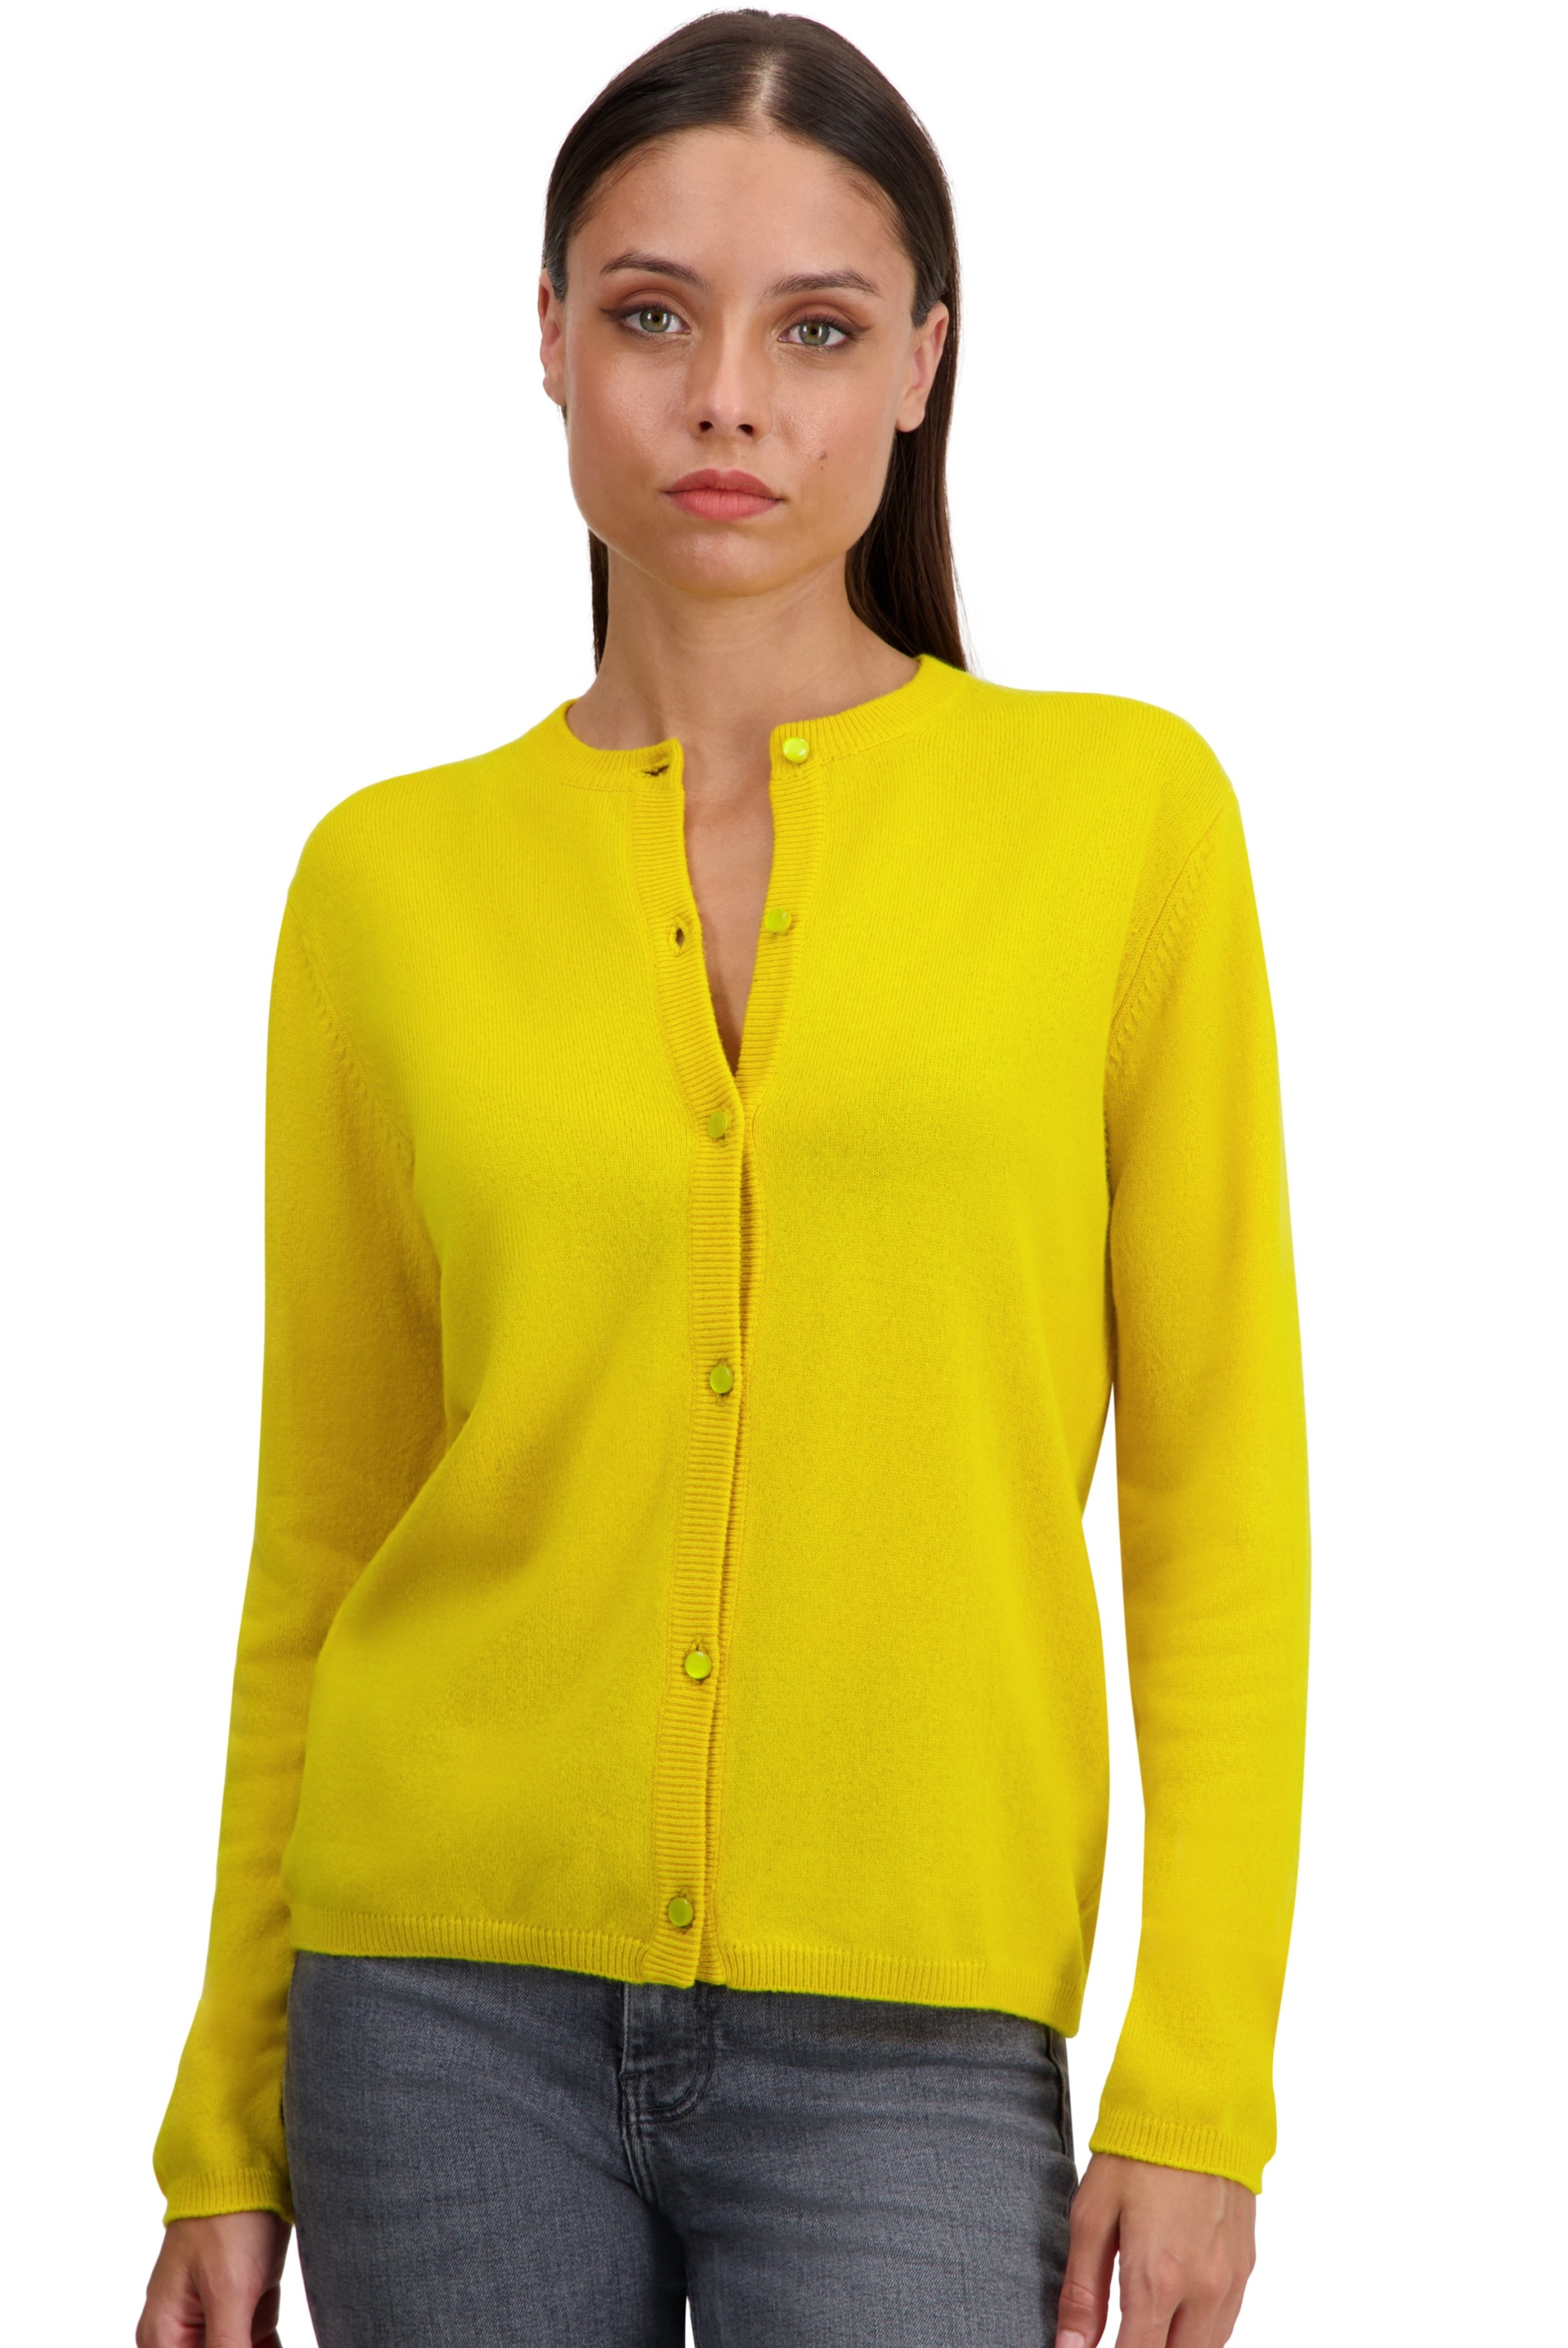 Cashmere ladies spring summer collection chloe cyber yellow s